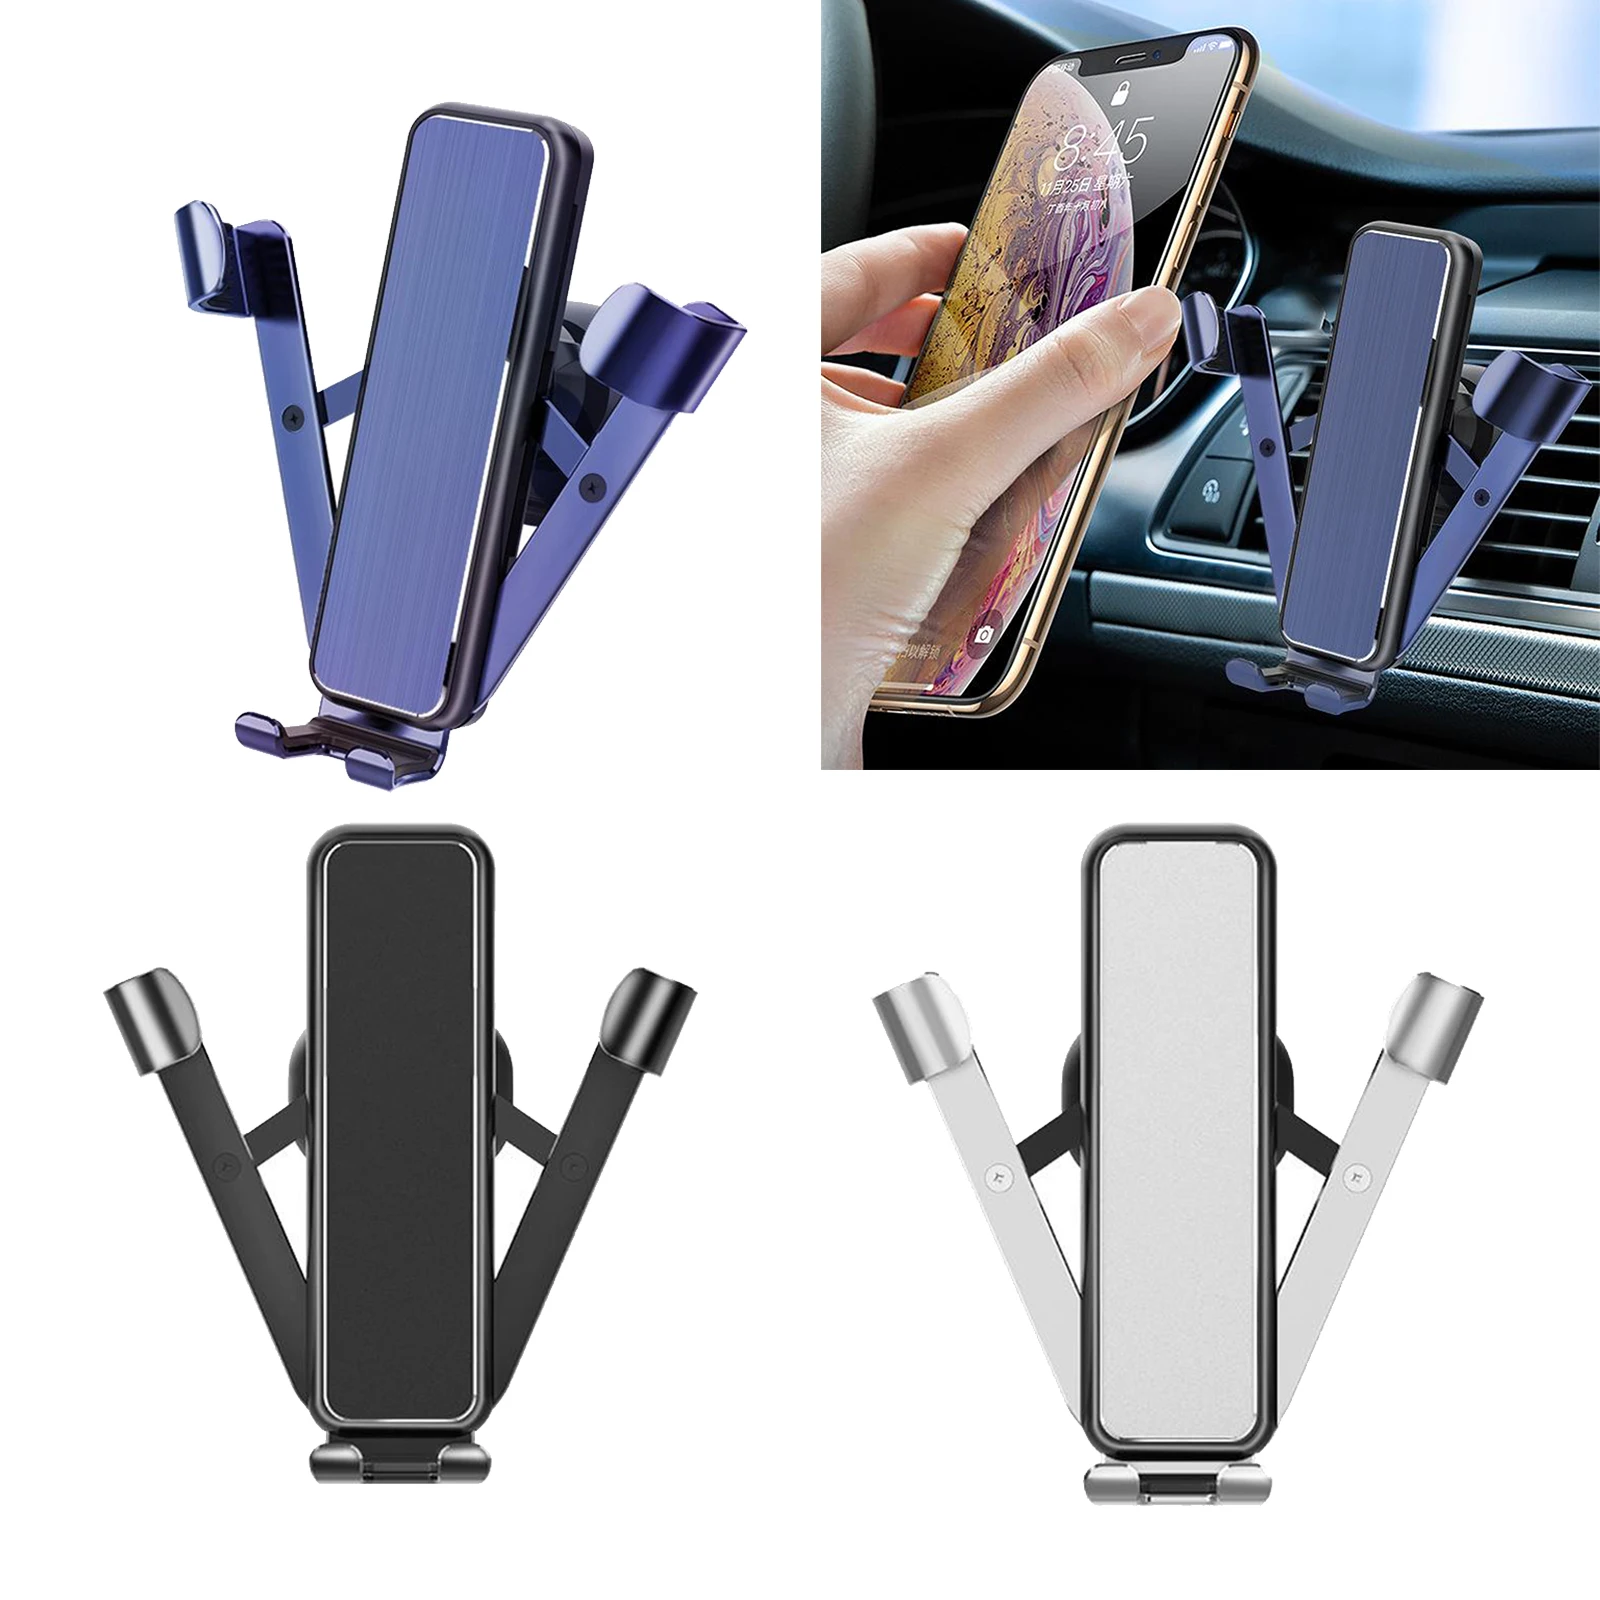 

Car Phone Mount for Air Vent Cell Phone Car Mount Gravity Phone Holder Hands Free Clip Fit for 4-6 inch Phones Smartphone